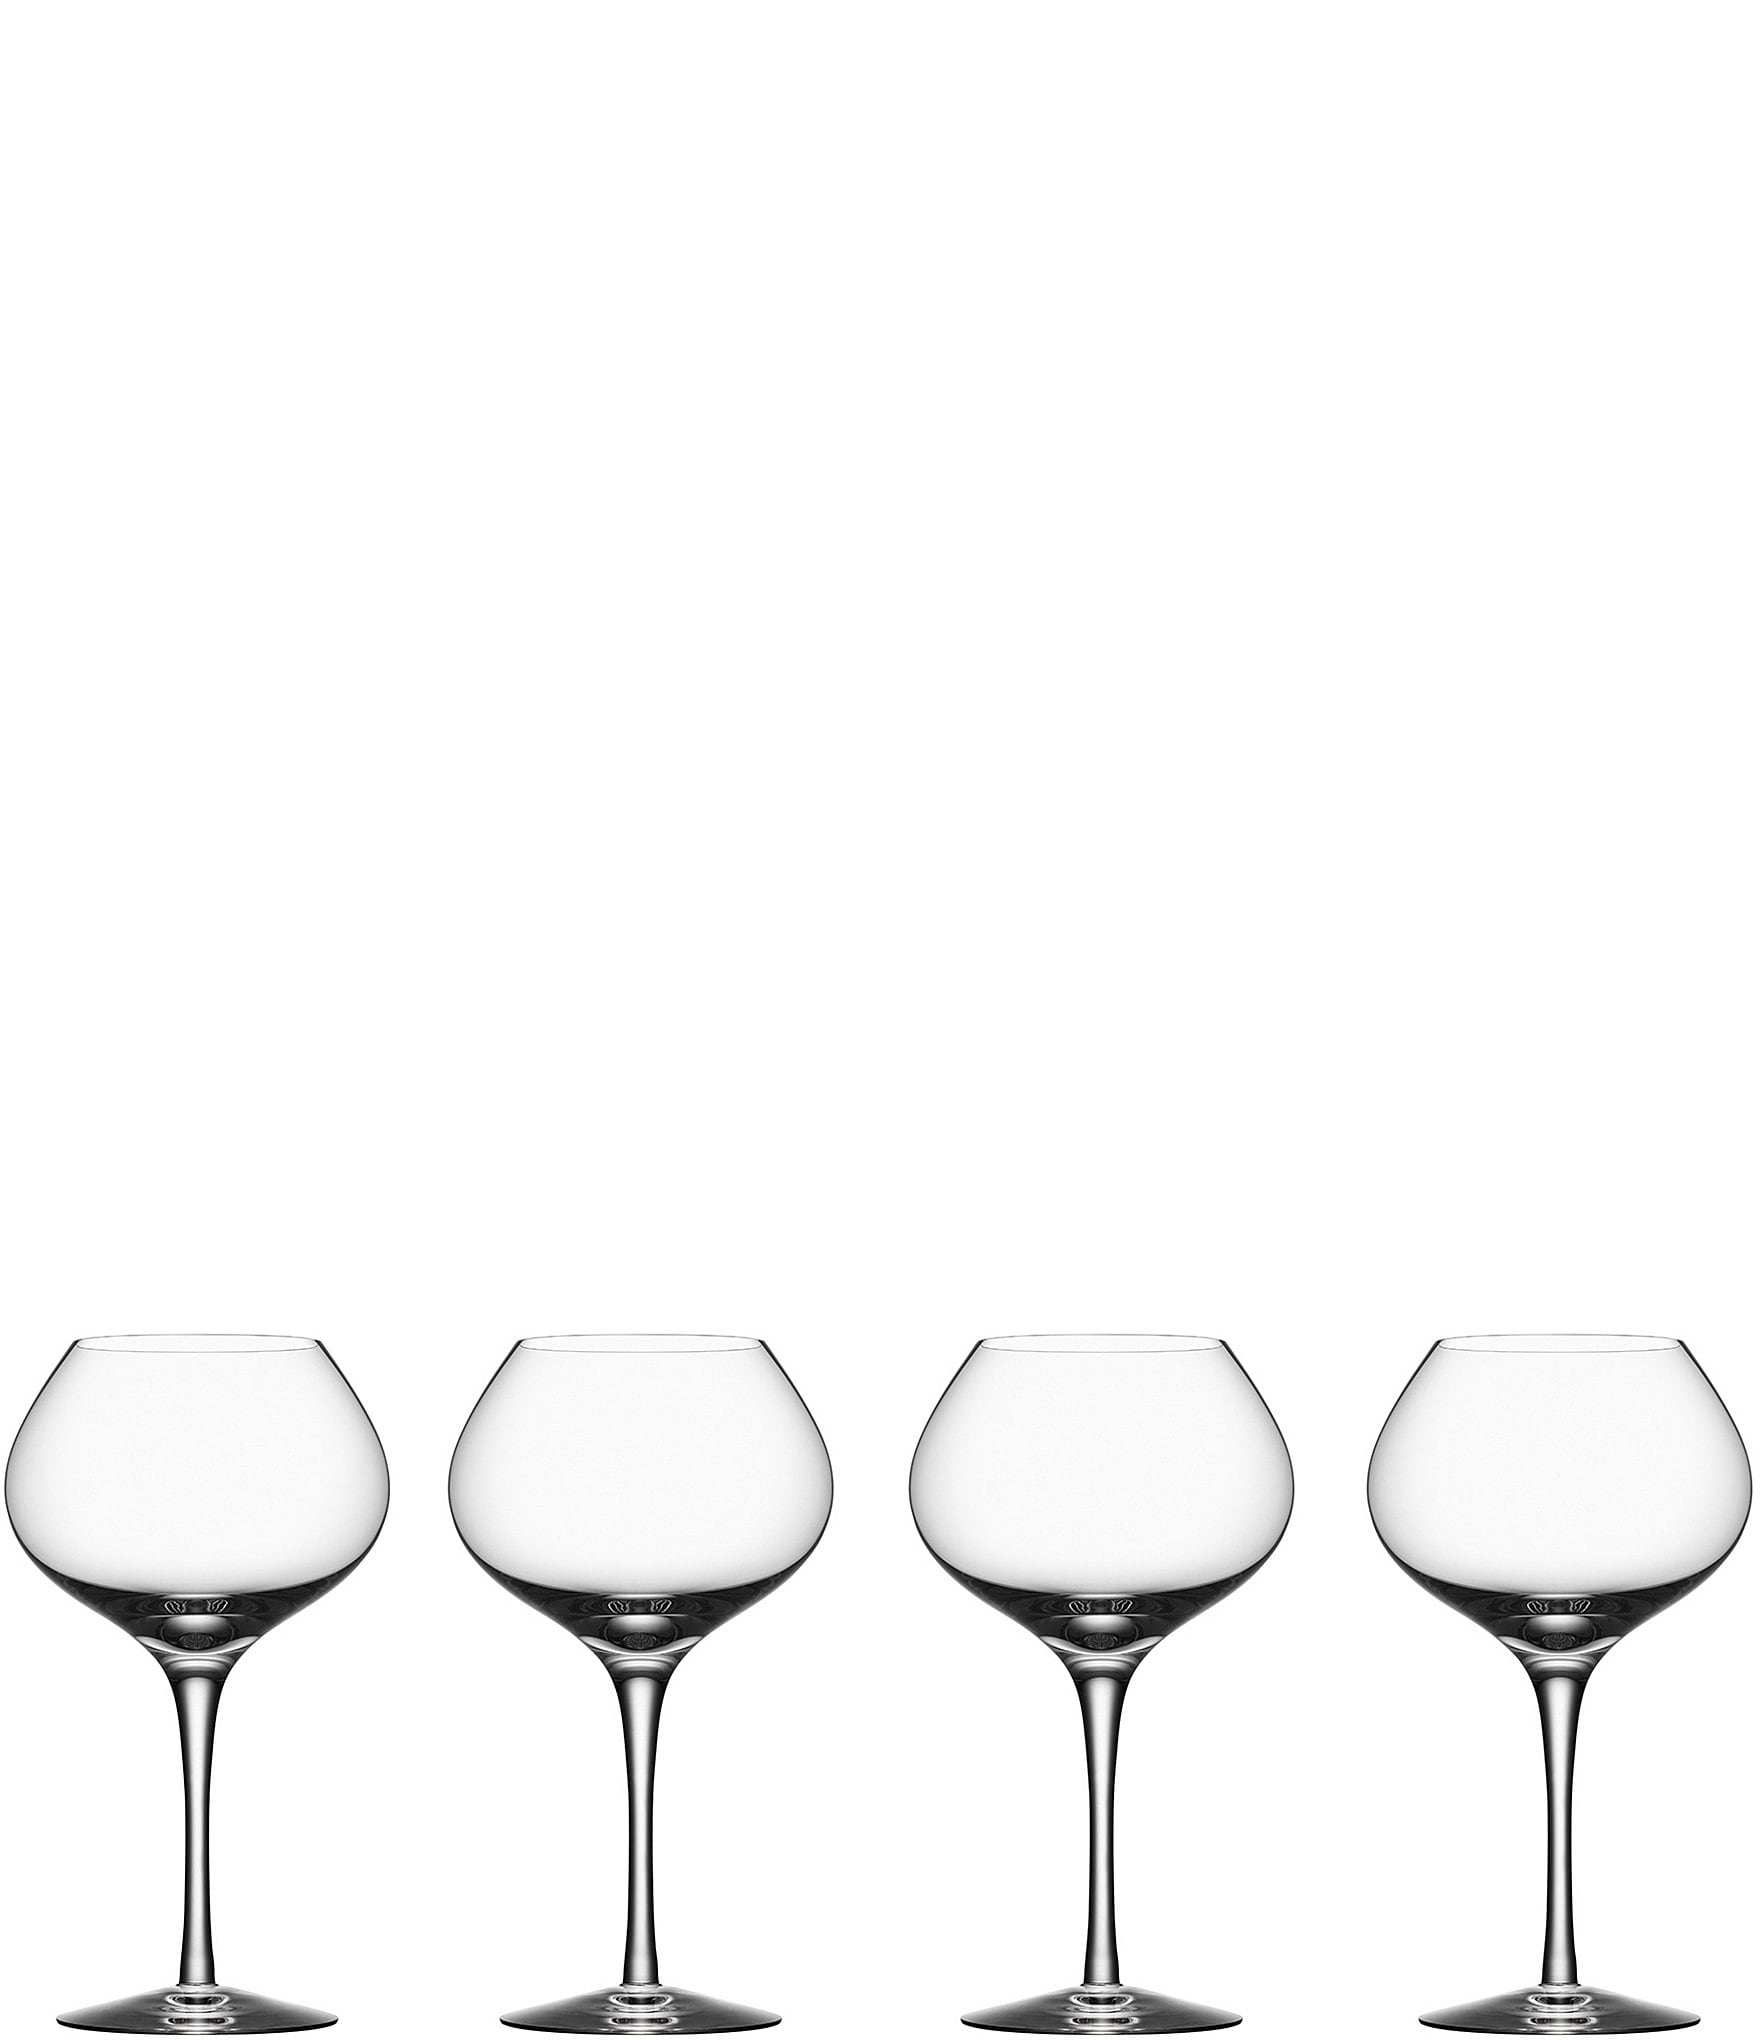 More More Wine - Set of 4 - Orrefors US